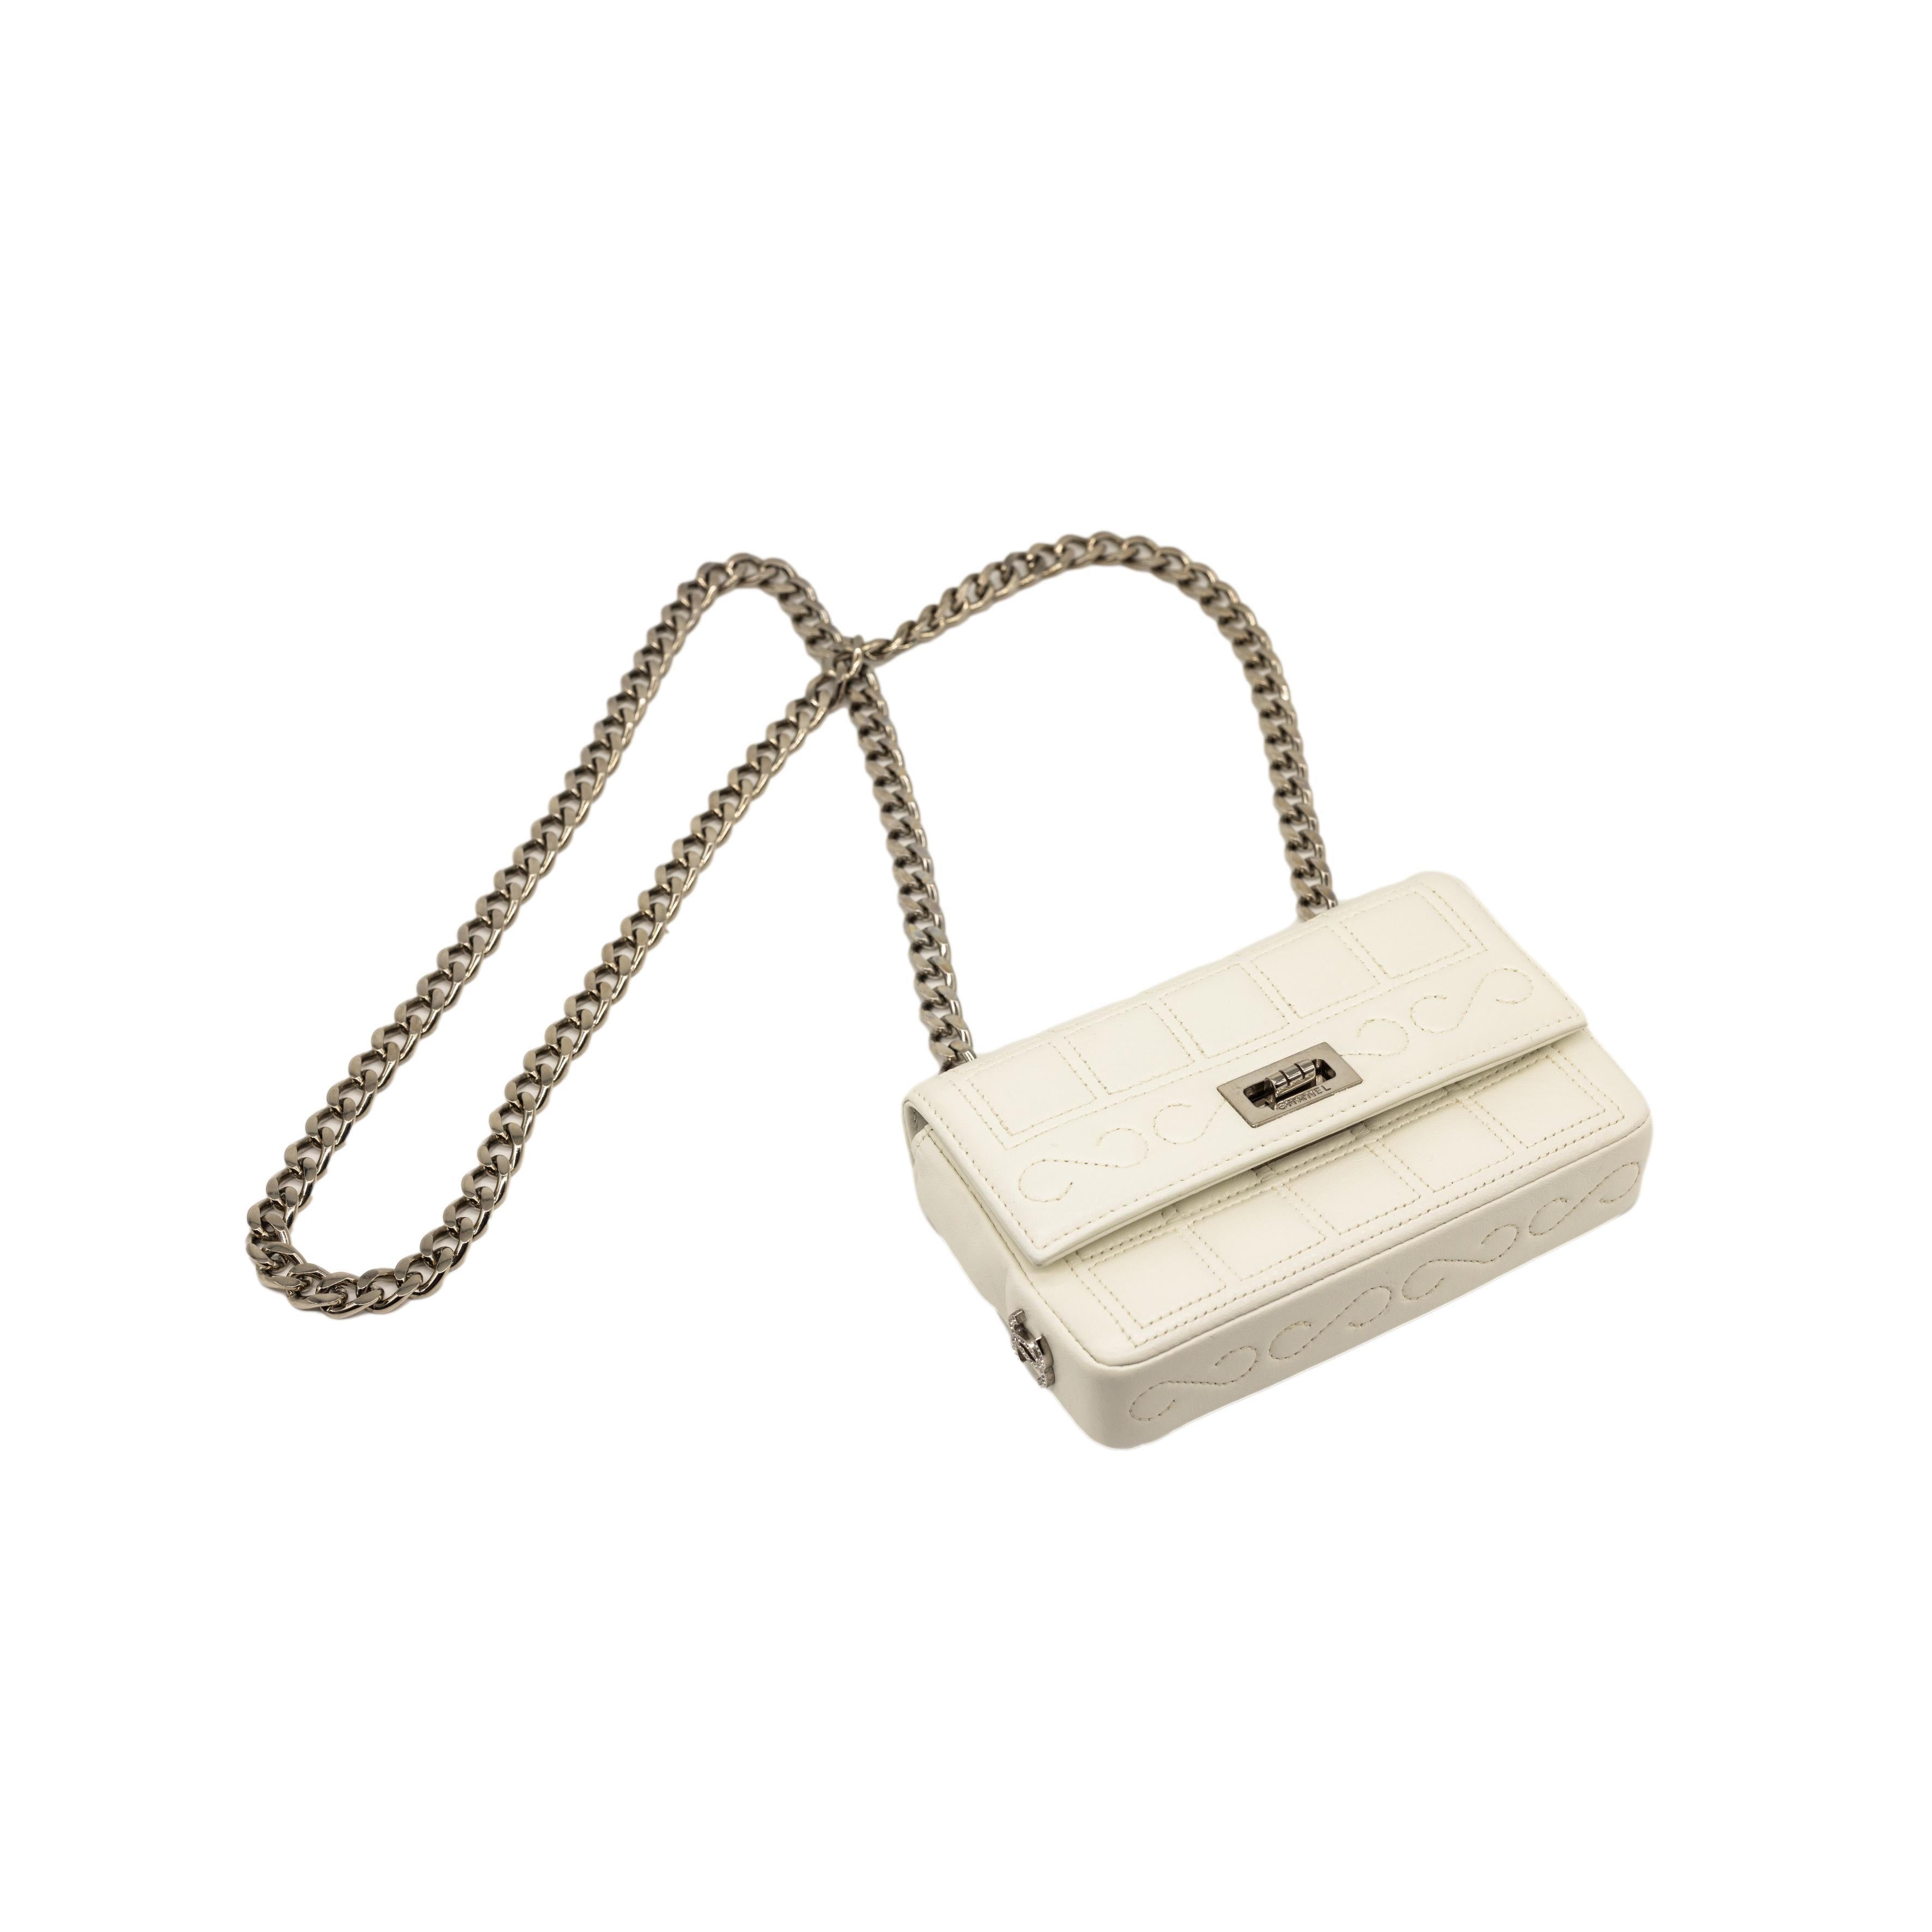 Chanel Limited Edition 2.55 Re-Issue White Mini Chocolate Bar Shoulder Bag, 2002 - 2003. The iconic Chanel bag was originally issued by Coco Chanel in February 1955 which became the very first socially acceptable shoulder bag for the modern day